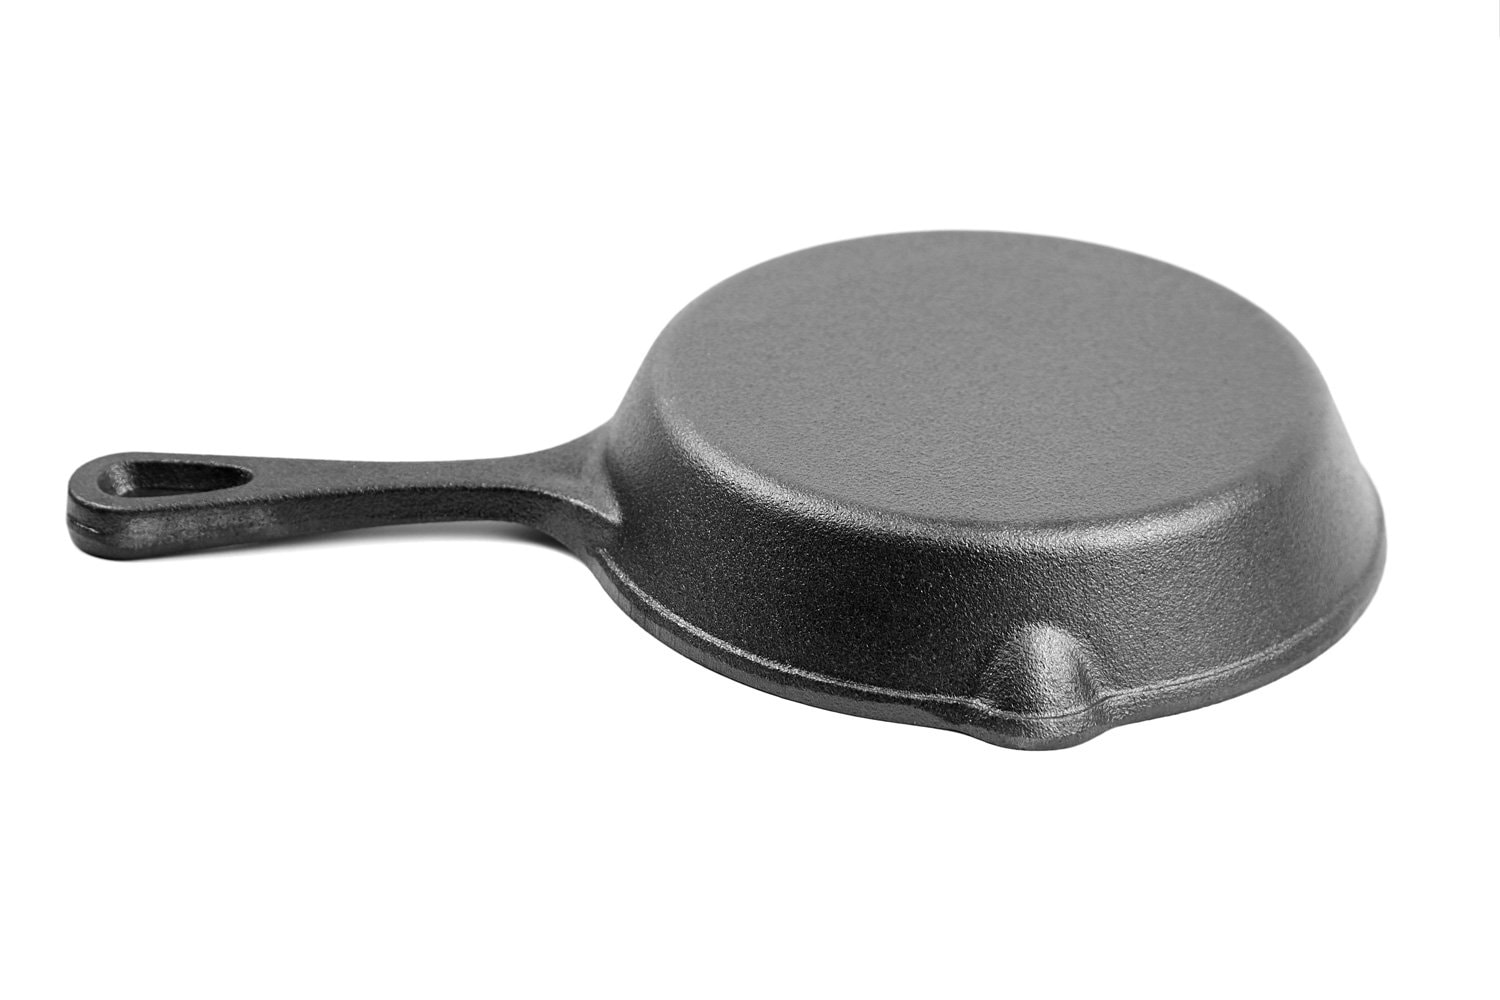 Cast iron pan with handle isolated on white background. One black empty frying skillet bottom, back side. Kitchen equipment, cookware